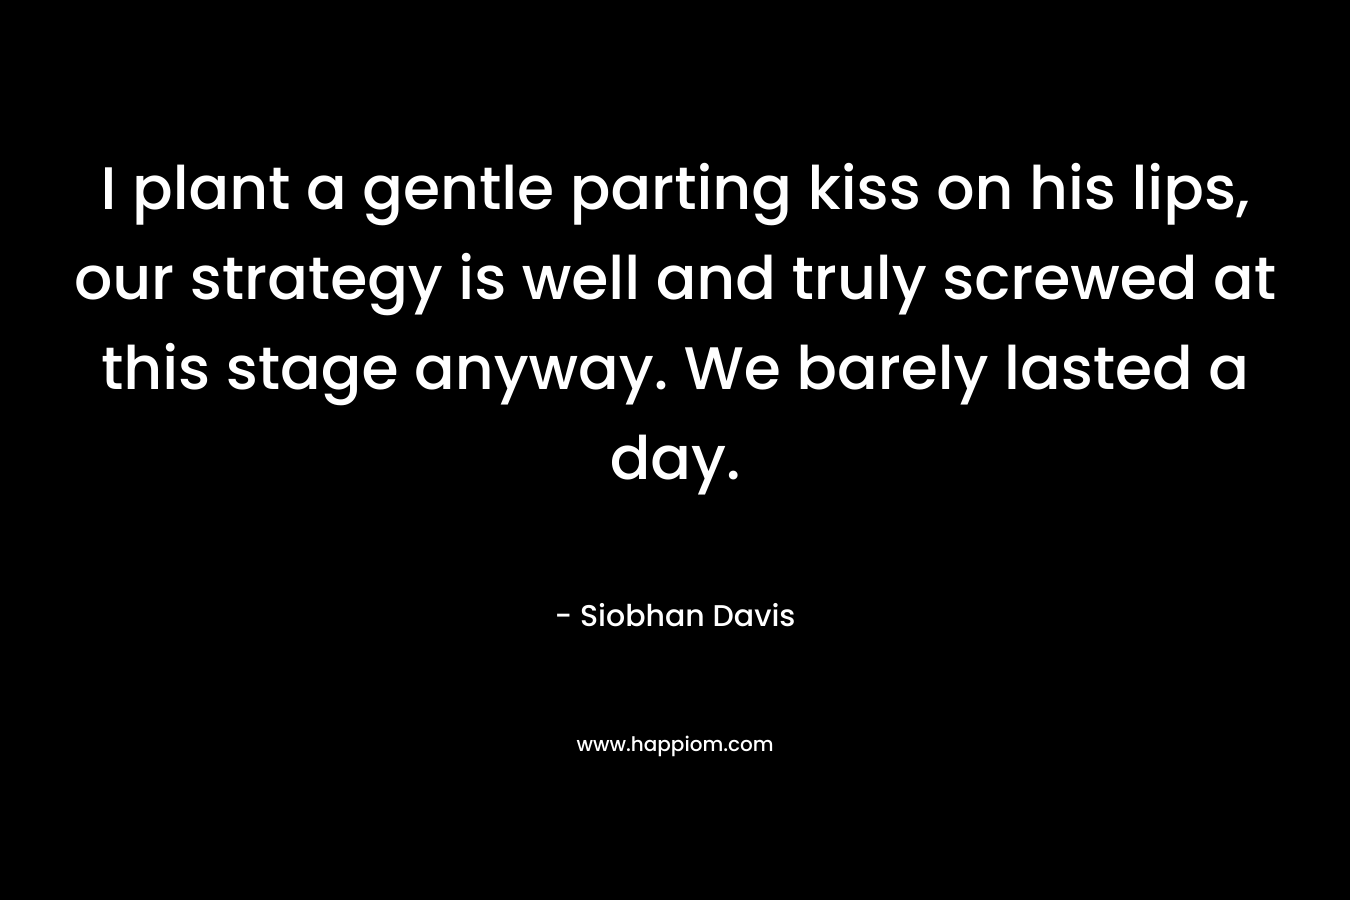 I plant a gentle parting kiss on his lips, our strategy is well and truly screwed at this stage anyway. We barely lasted a day. – Siobhan Davis